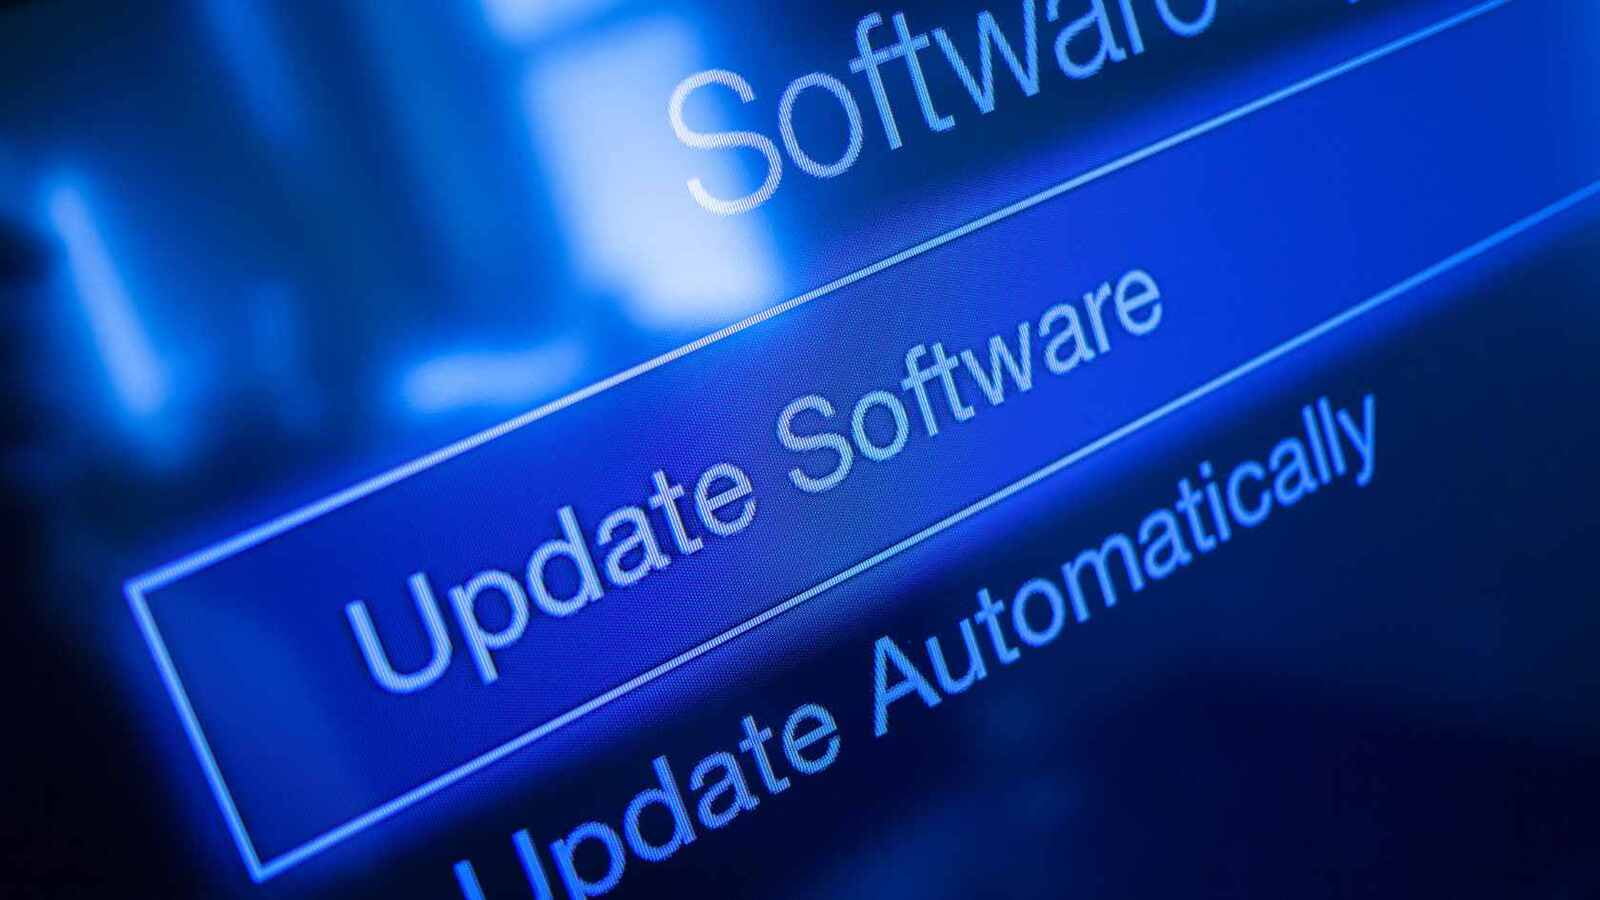 Verify any software updates to protect supply chain security